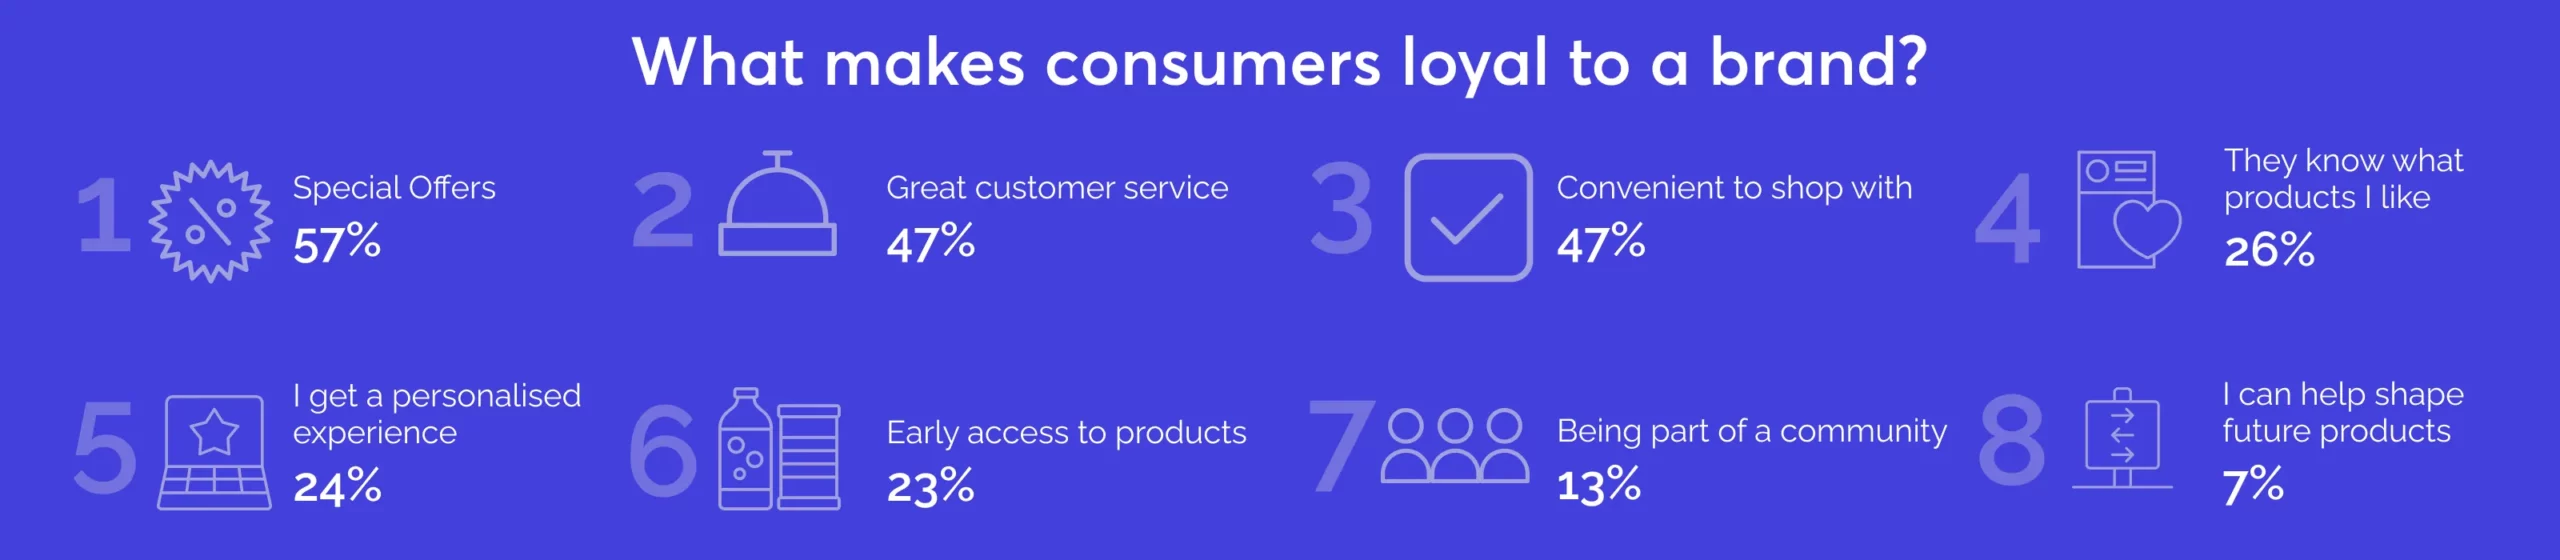 What makes consumers loyal to a brand